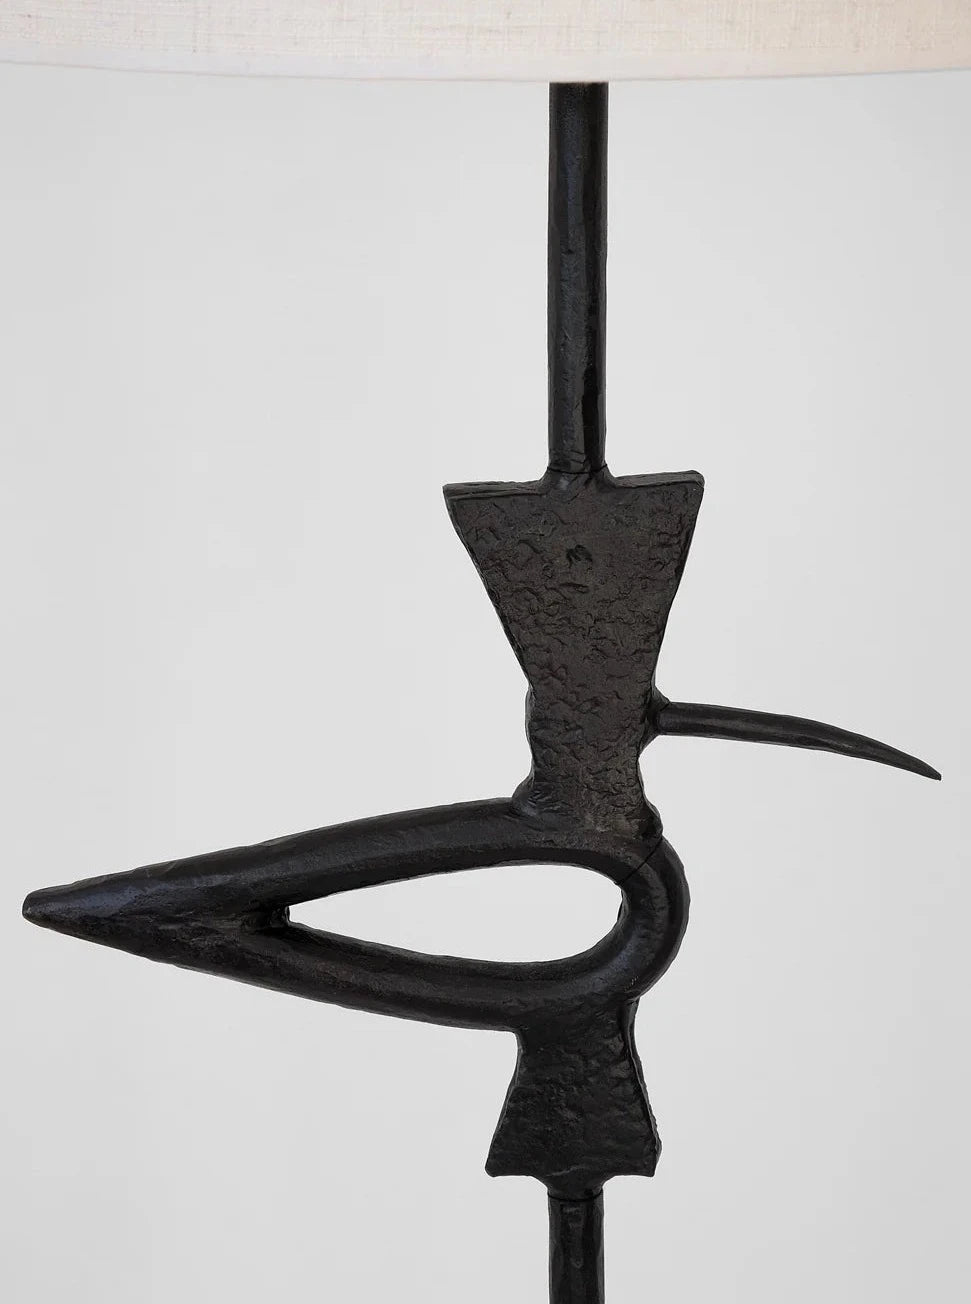 A close-up photo of an abstract, black metal sculpture resembling a bird with a pointed beak and an elongated, curved body. The "Brejos" Floor Lamp by Barracuda Interiors features this sculpture attached to a vertical rod, set against a plain light gray background.